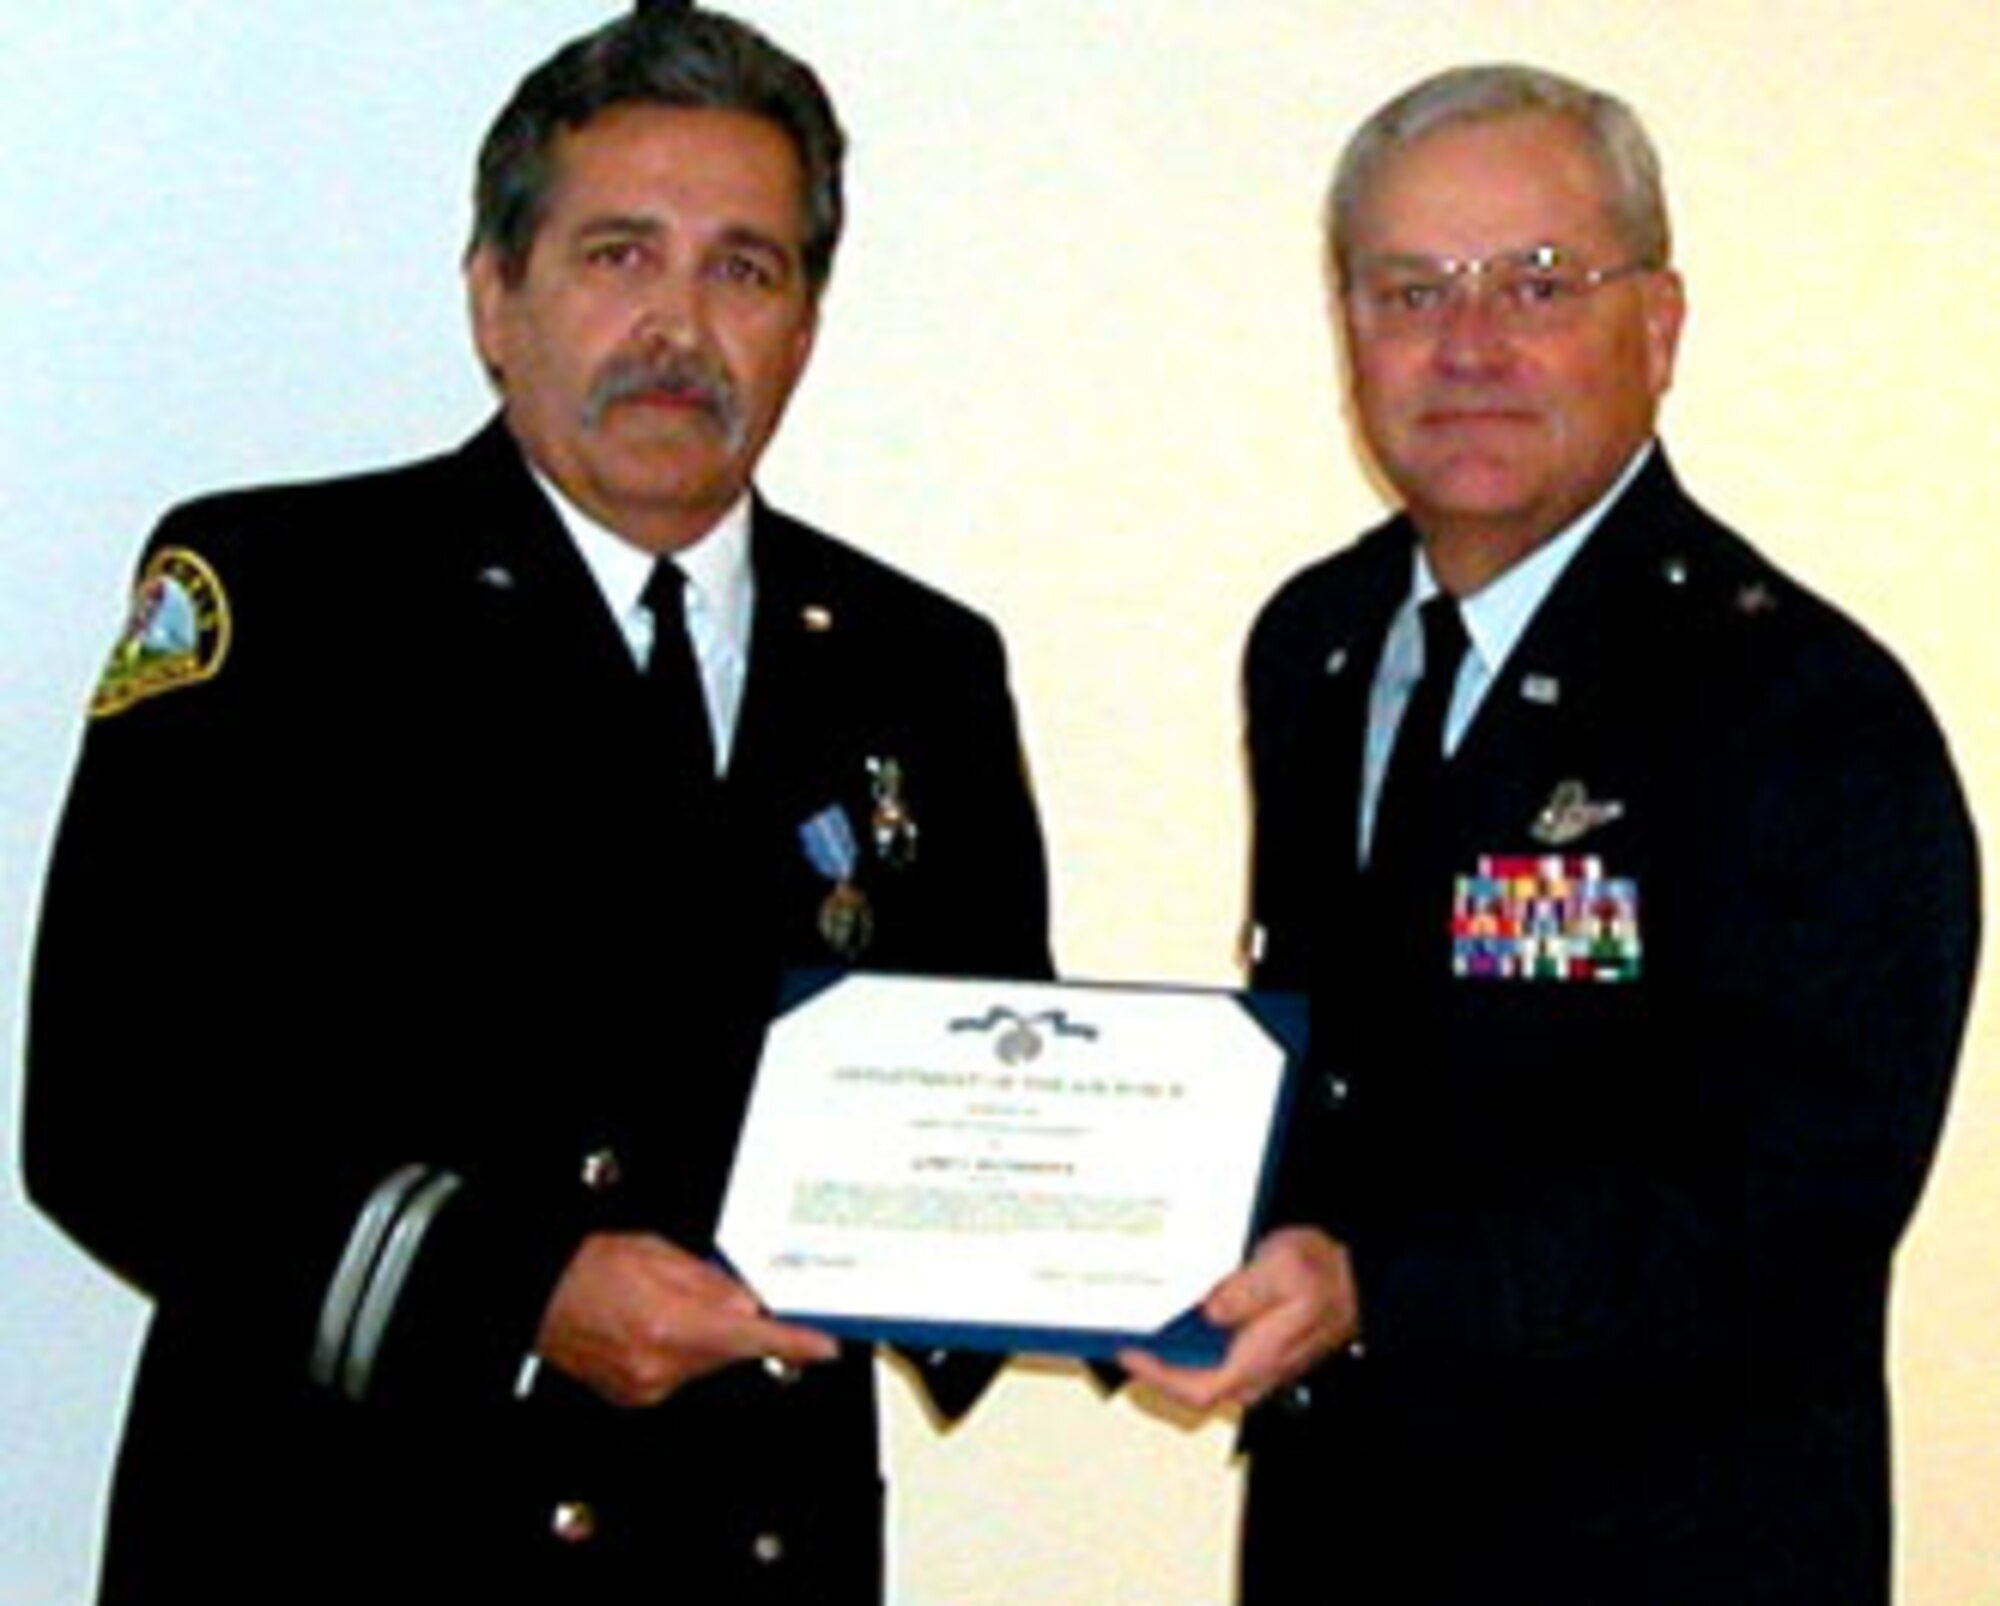 Mr. Gary Bicondova, 452nd Air Mobility Wing Fire Department, March Air Reserve Base, is awarded the Air Force Civilian Achievement Medal and wing coin from Brig Gen James L. Melin, 452 AMW commander, for exceptional performance on March Brush Engine 10 during the Esperanza fire on 26 October 2006.  Five U.S. Forest Service firefighters died battling an arson wildfire where they were overcome by 90-foot-tall walls of flame advancing at 40 mph.
Mr. Bicondova used his emergency medical technician skills to sustain the live of another firefighter, Captain Mark Loutzenhiser, who later died at the hospital from severe burns to his entire body. The five firefighters were trapped in a burnover which can occur when an advancing fire driven by high winds jumps a protective line and traps firefighters in its path. The trapped firefighters did not have time to don their protective gear.  (U.S. Air Force photos by LaGina Jackson)
